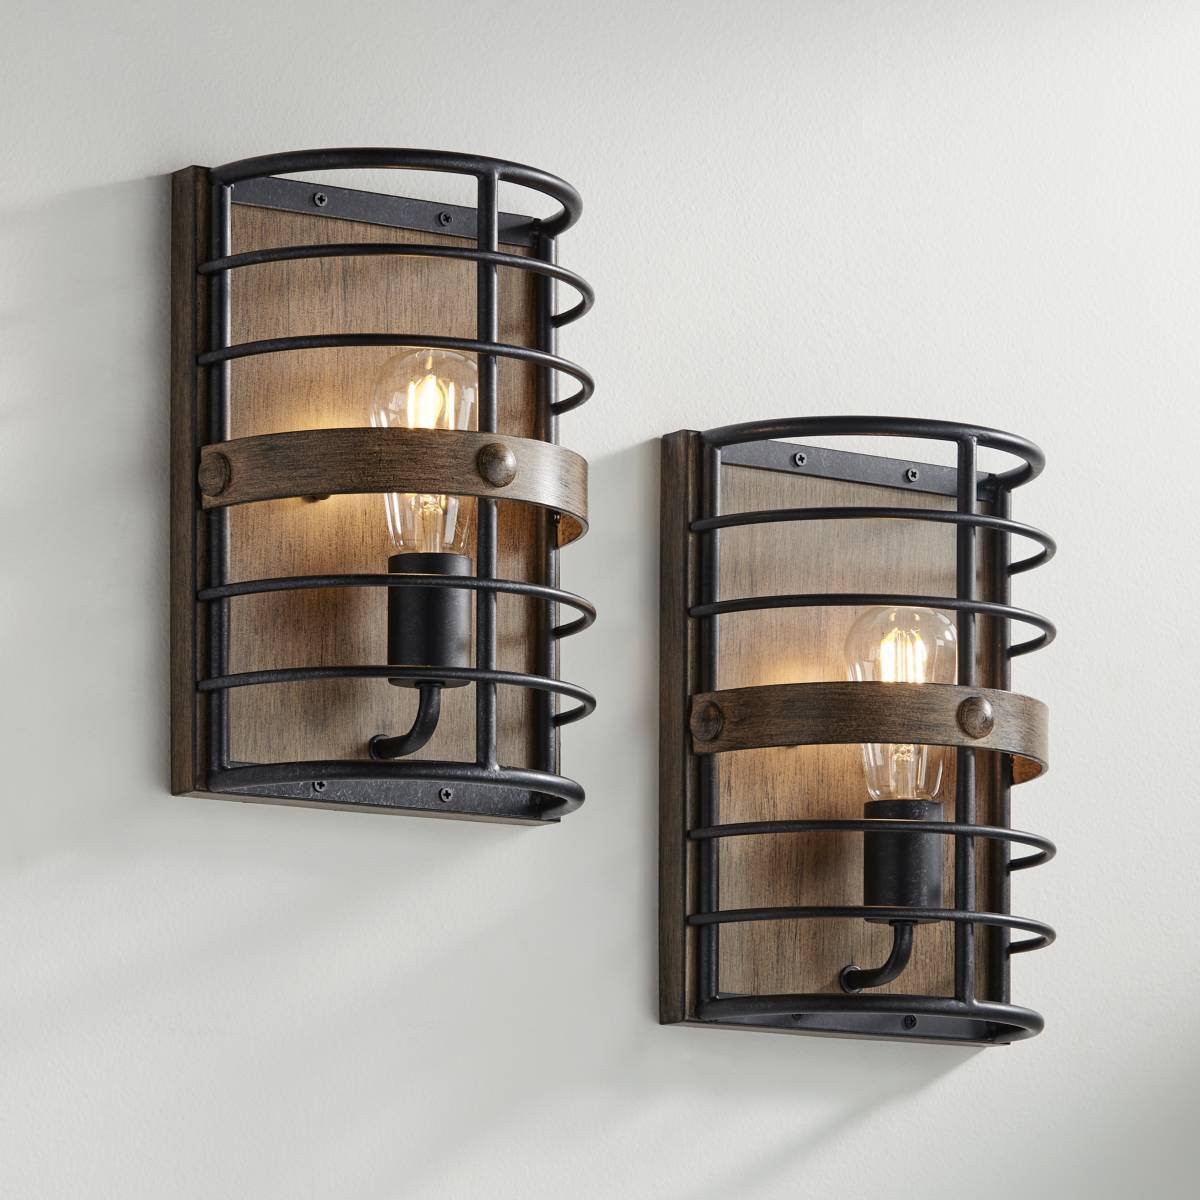 Lexi 11 And One Half High Oil Rubbed Bronze Pocket Wall Sconce Set Of 2  655v4cropped ?qlt=70&wid=1200&hei=1200&fmt=jpeg